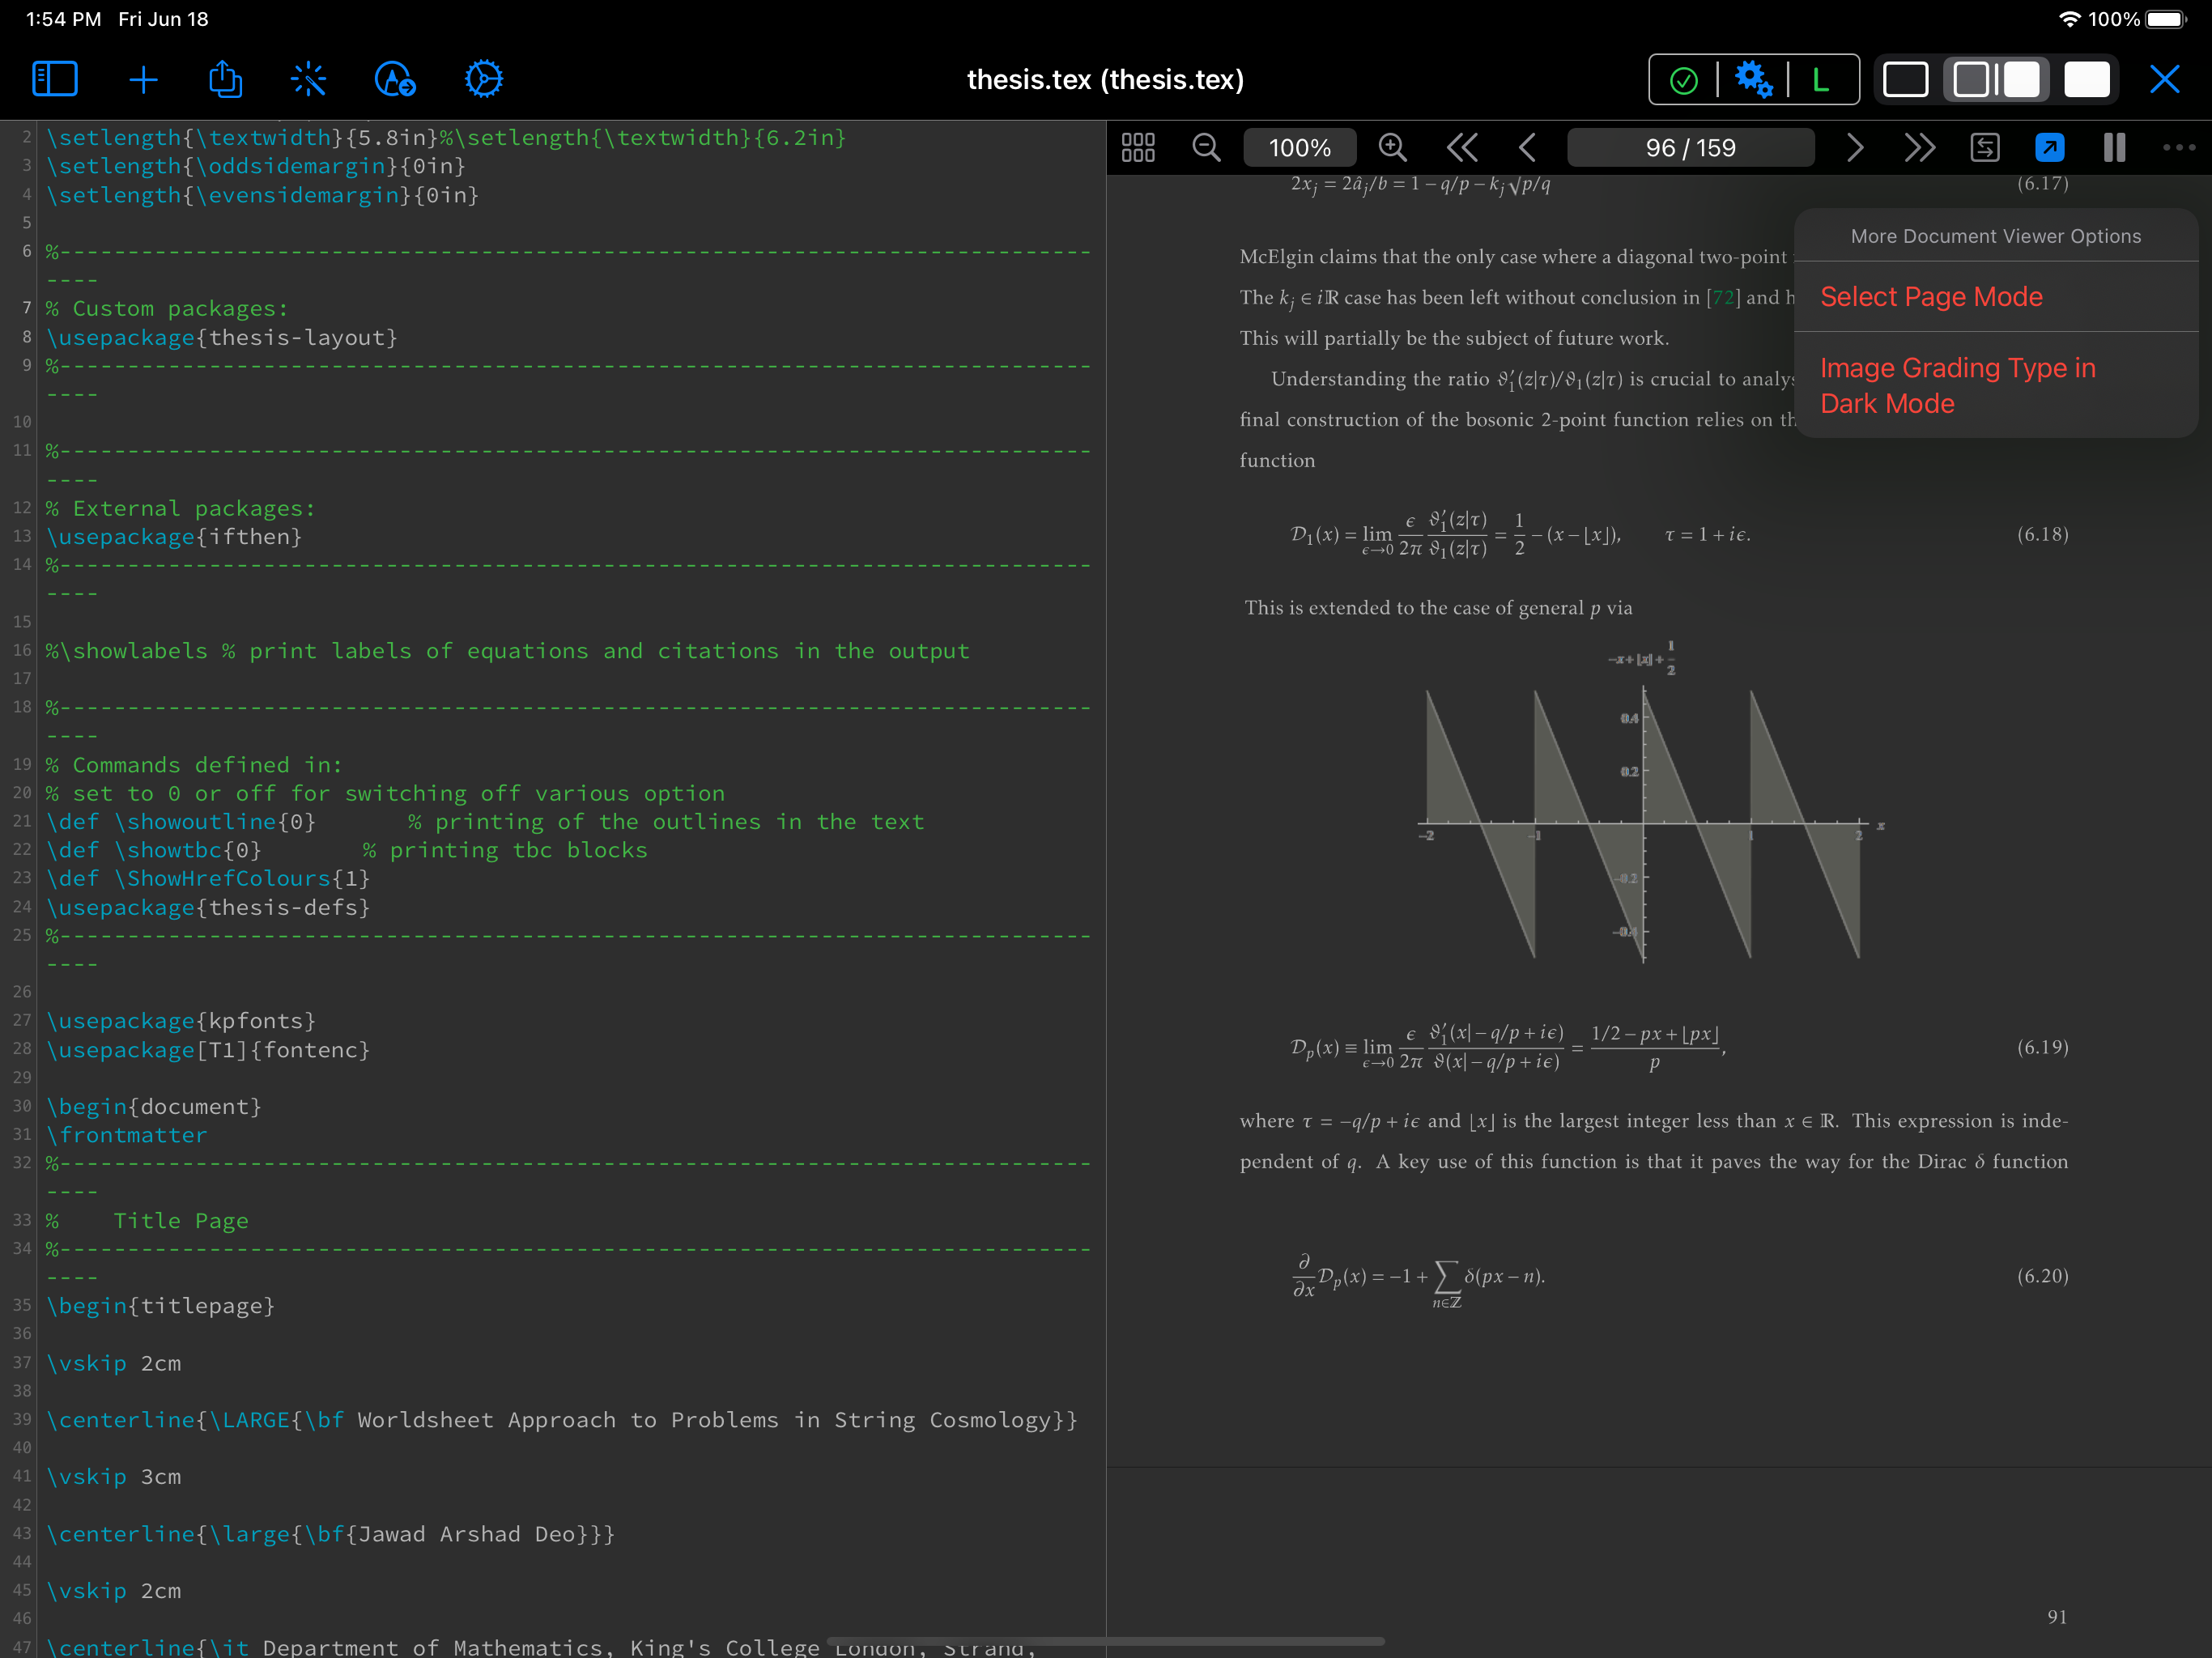 docs/apps/workspace/document-viewer/grading/workspace-grading-options-1-dark-mode_ios_ipad.png